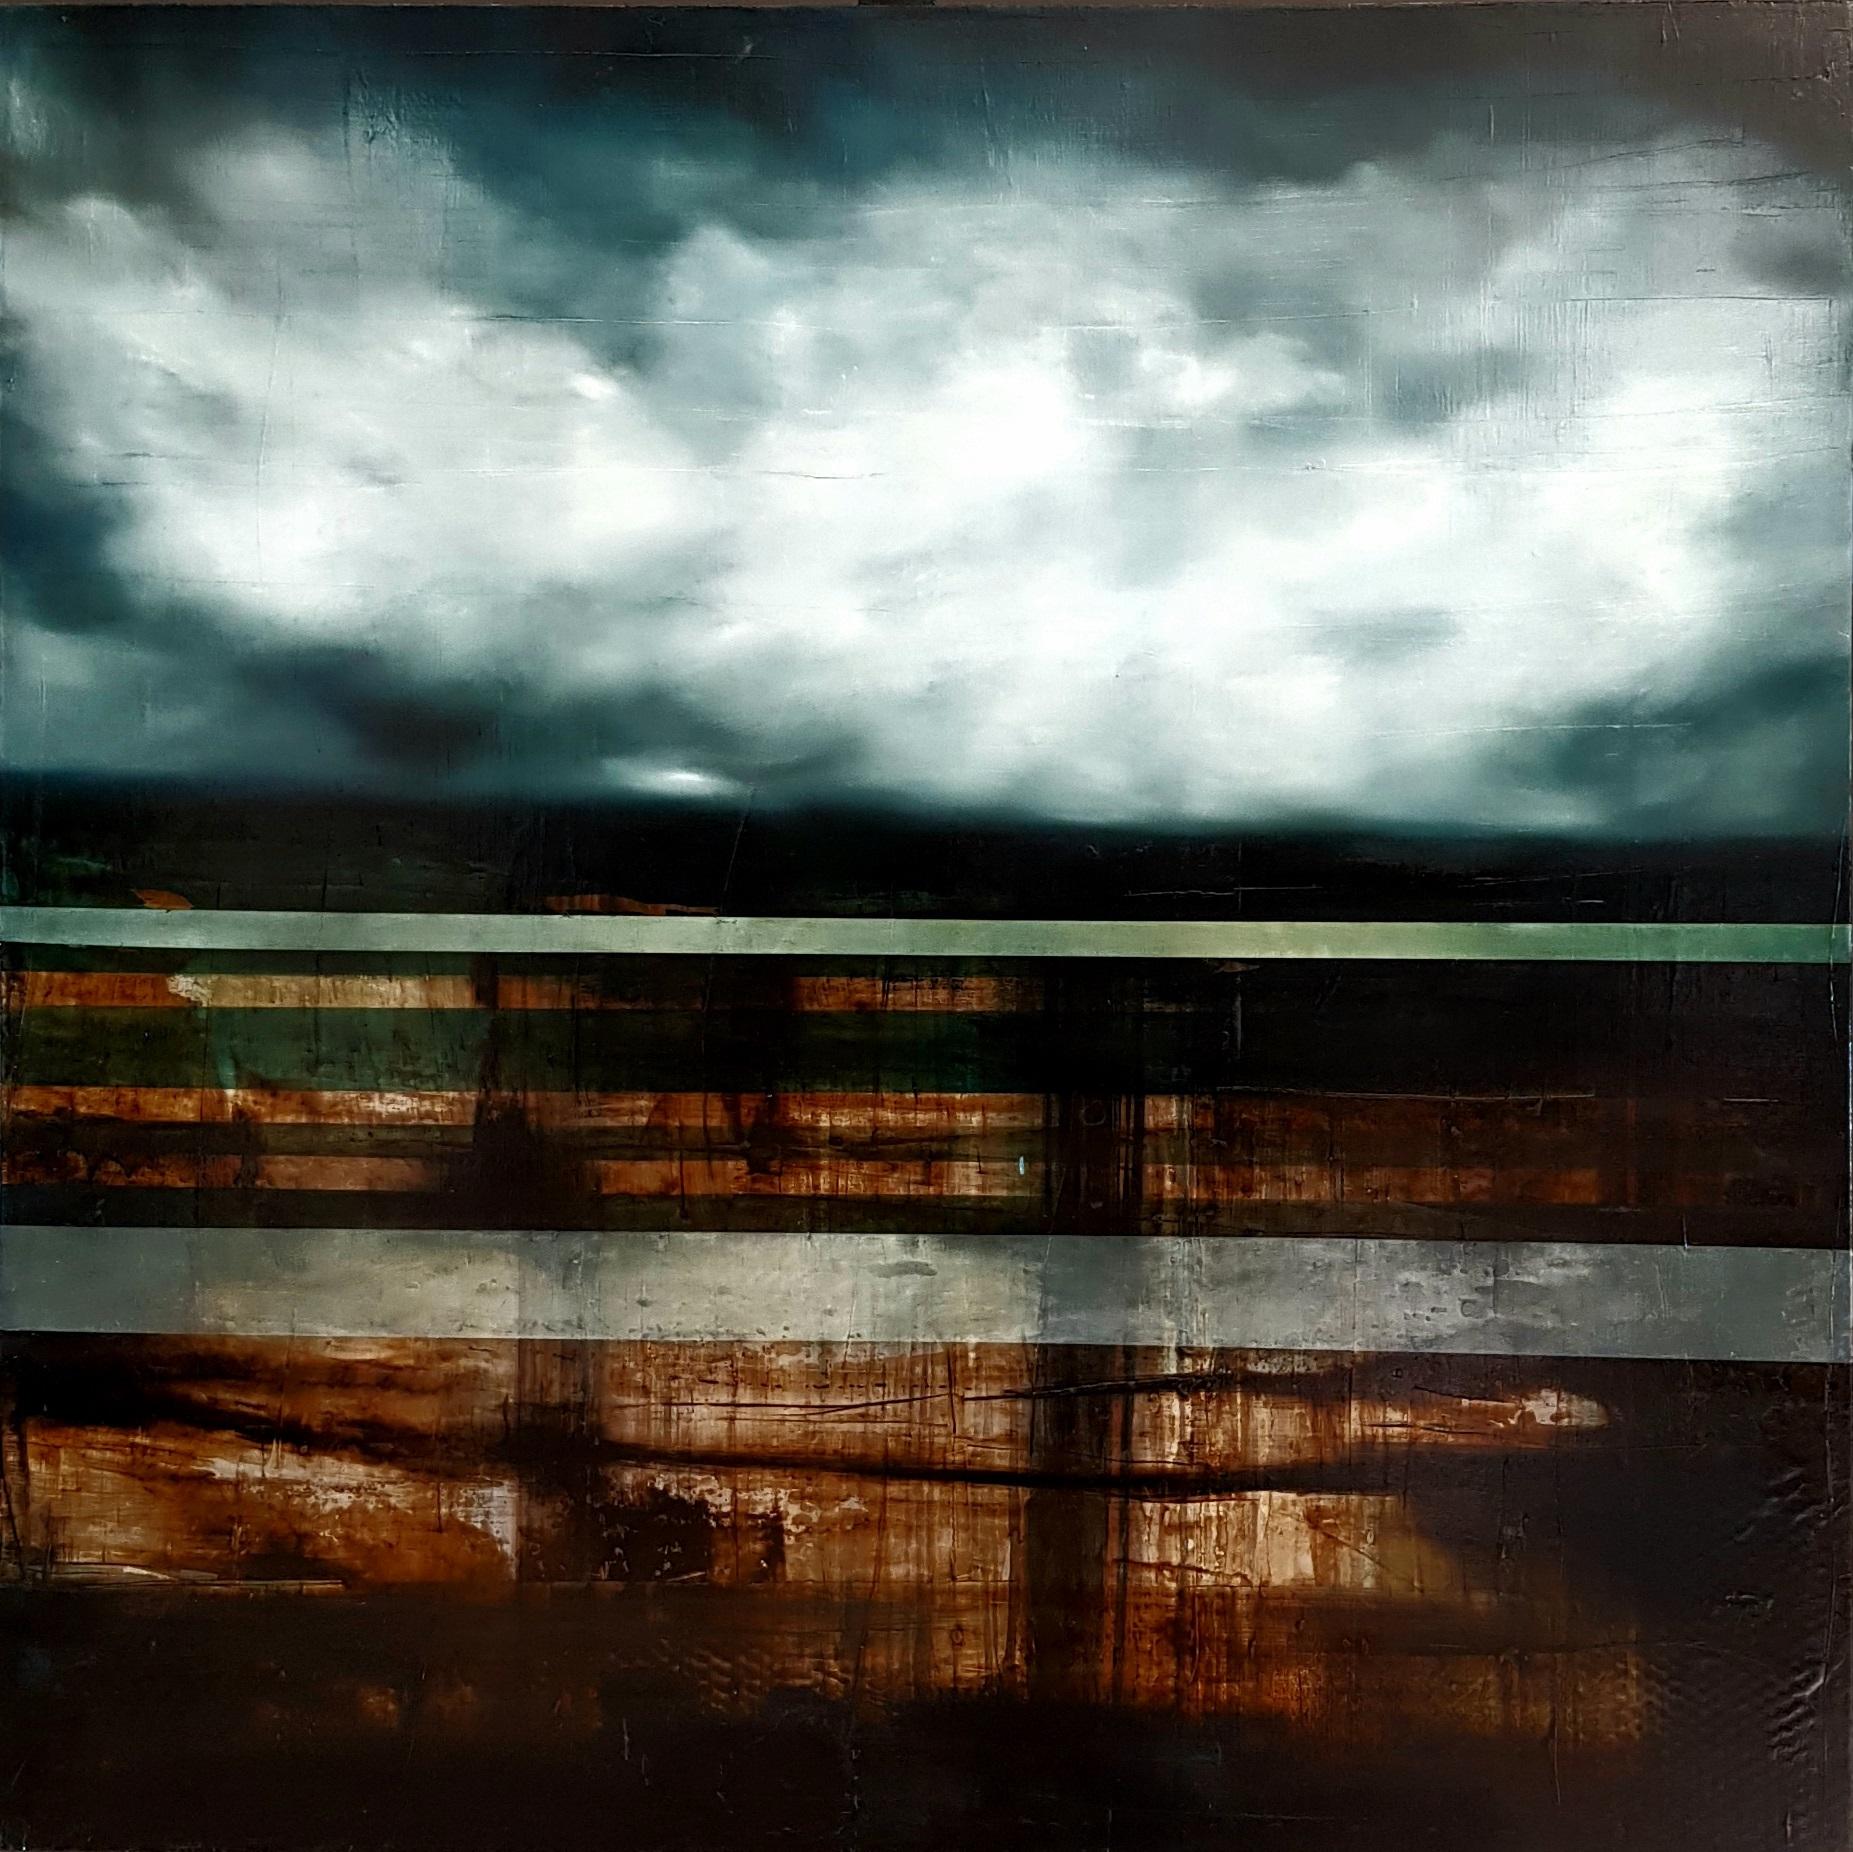 Landfall III is a unique oil on canvas painting by contemporary artist Joachim van der Vlugt, dimensions are 140 × 140 cm (55.1 × 55.1 in).
The artwork is signed, sold unframed and comes with a certificate of authenticity.

Joachim van der Vlugt is